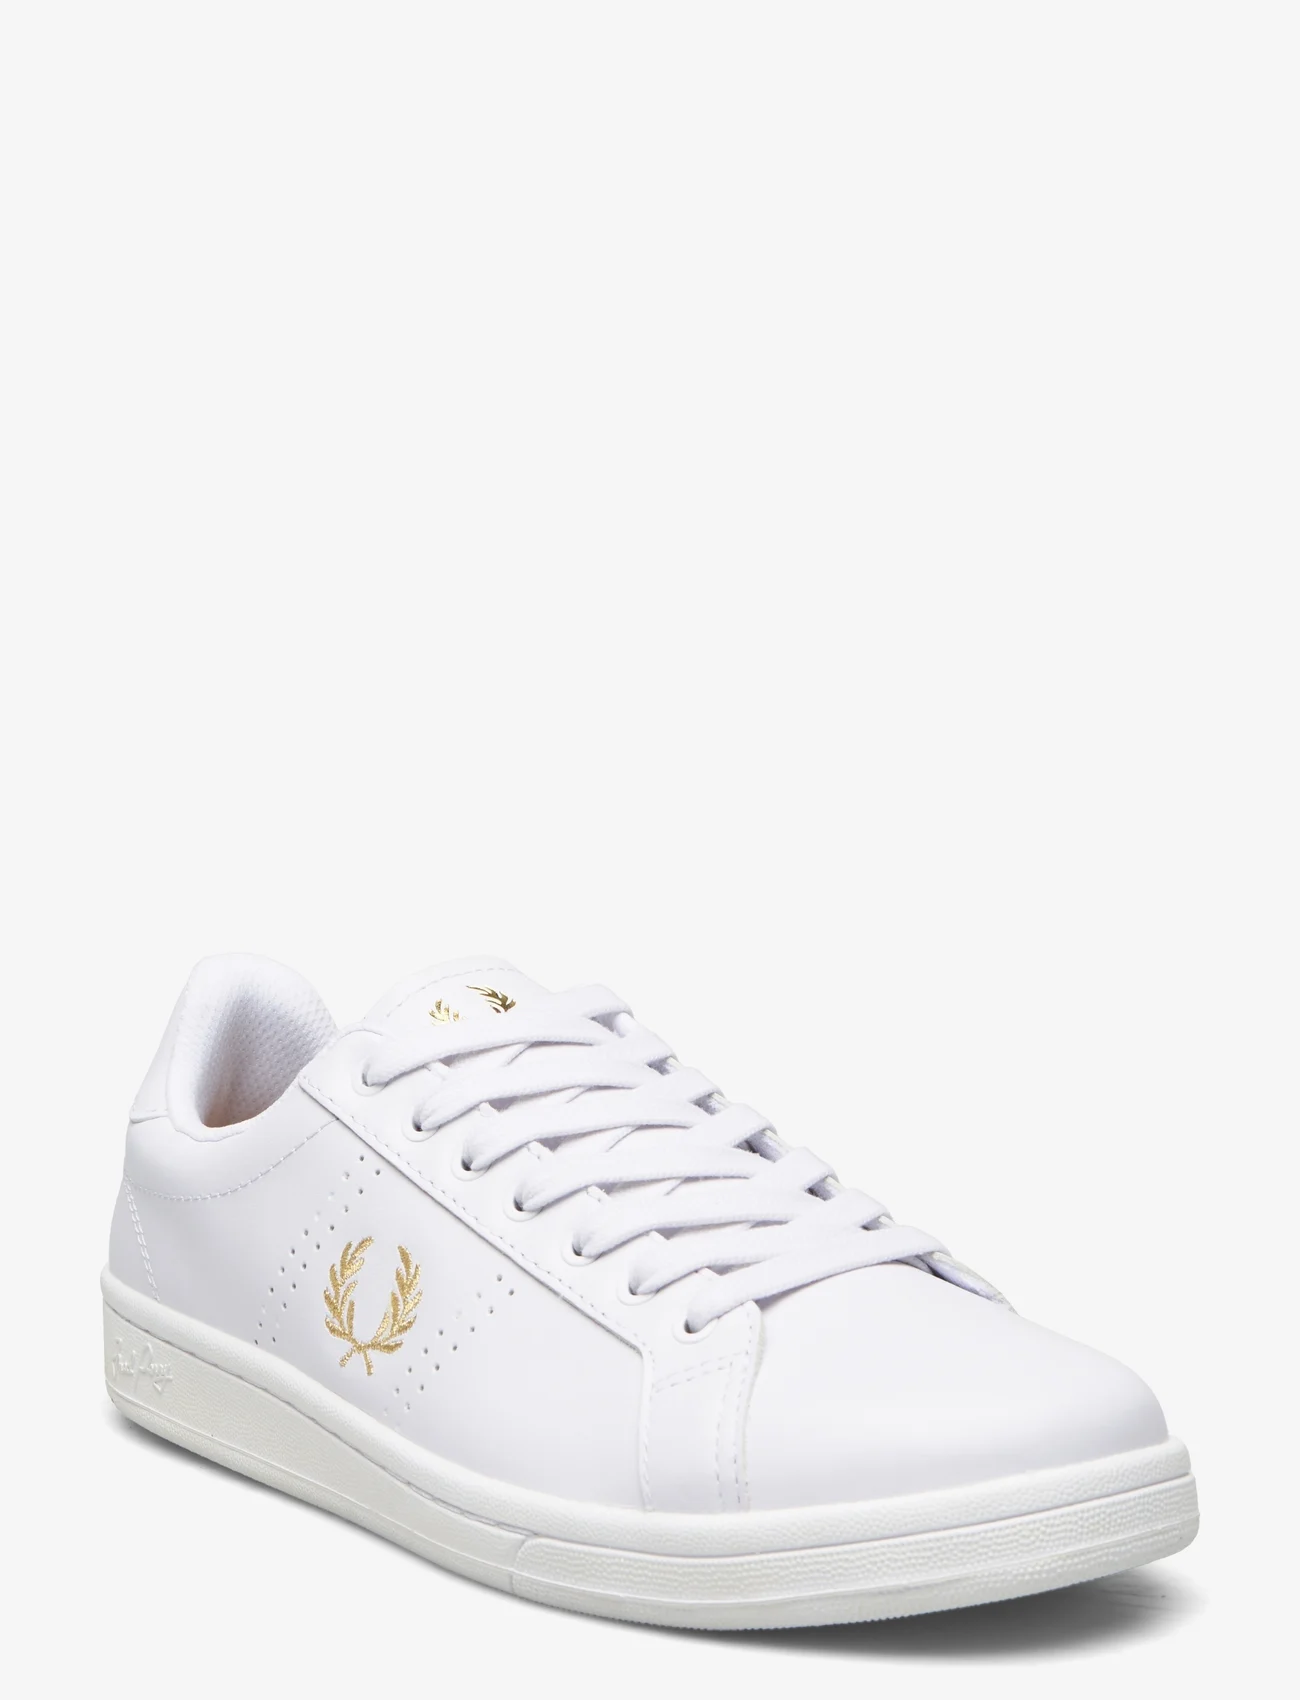 Fred Perry - B721 LEATHER - lave sneakers - white/m gold - 0